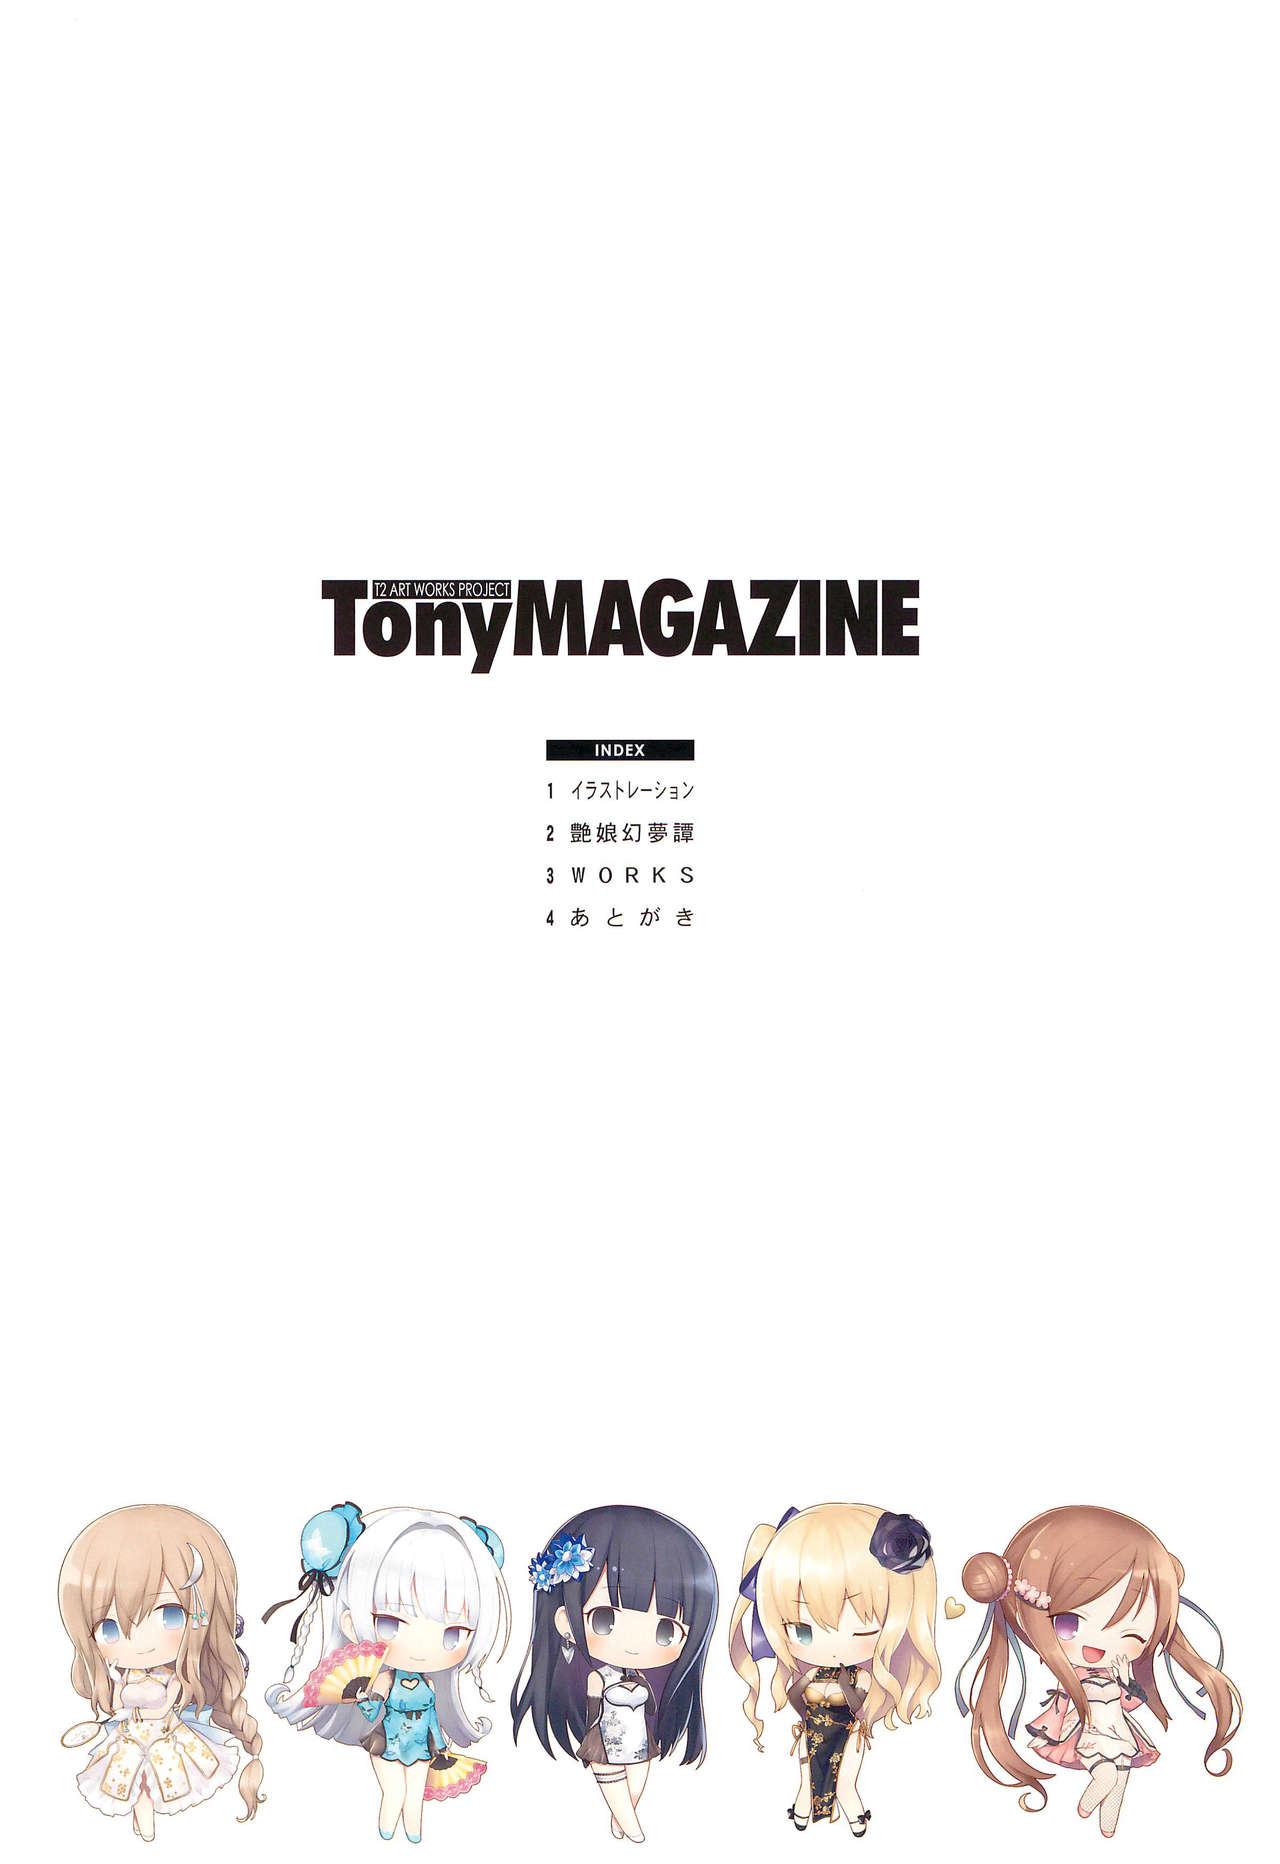 Guys Tony MAGAZINE 07 - Fate grand order Final fantasy vii Gaygroup - Page 4